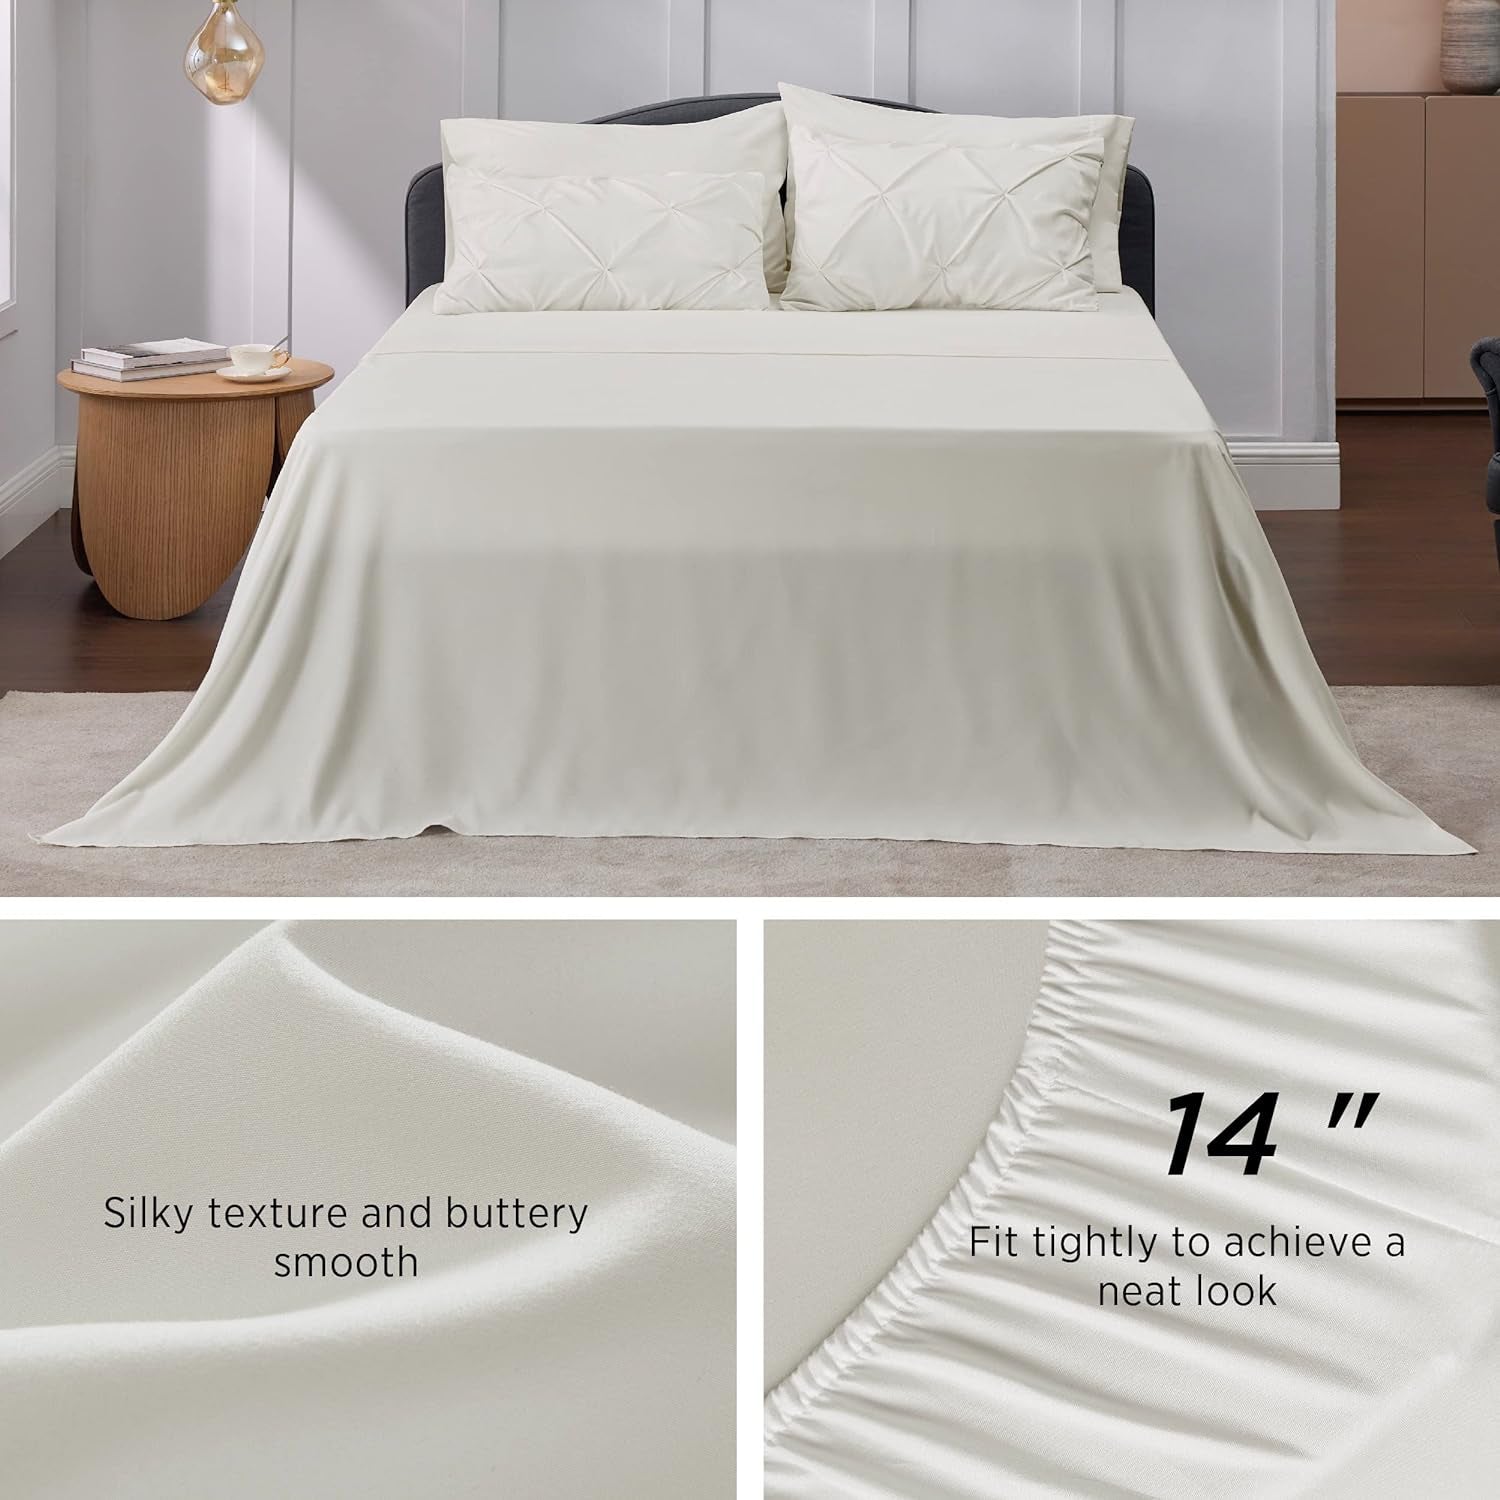 Ivory Comforter Set Queen - Bed in a Bag Queen 7 Pieces, Pintuck Bedding Sets Ivory Bed Set with Comforter, Sheets, Pillowcases & Shams